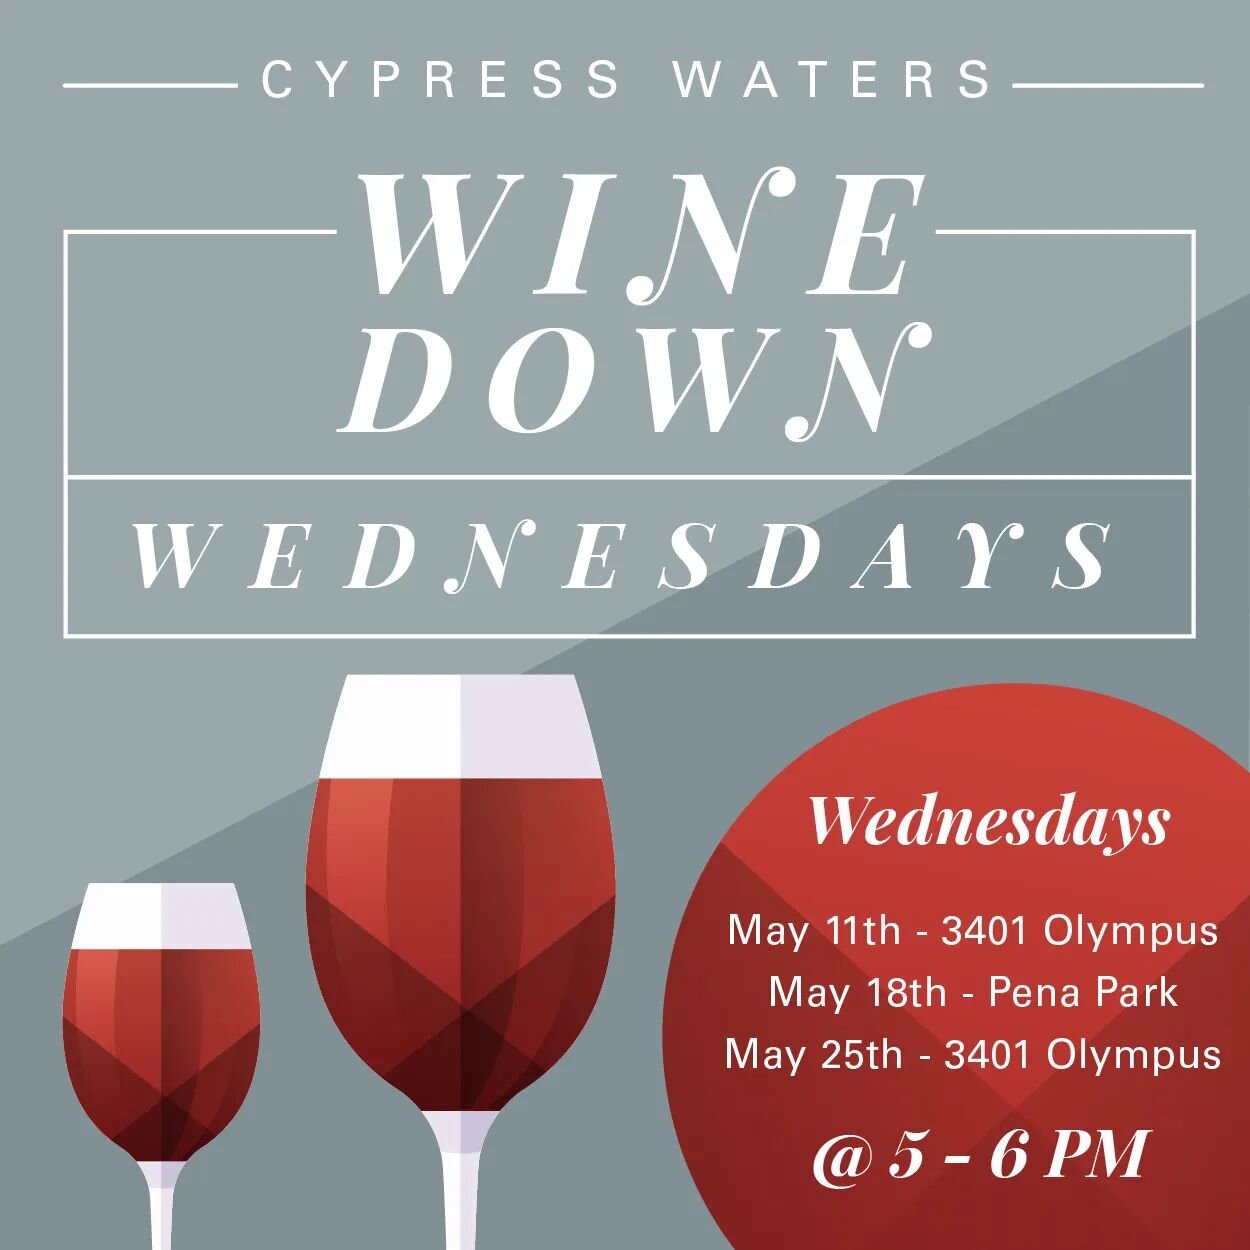 🍷 Wine Down Wednesdays are back! Tenants are invited to join us this week on Wed, May 11th at the Plaza between 3401 &amp; 3501 Olympus Blvd. We'll bring the wine and snacks, you bring your coworkers. See you then!